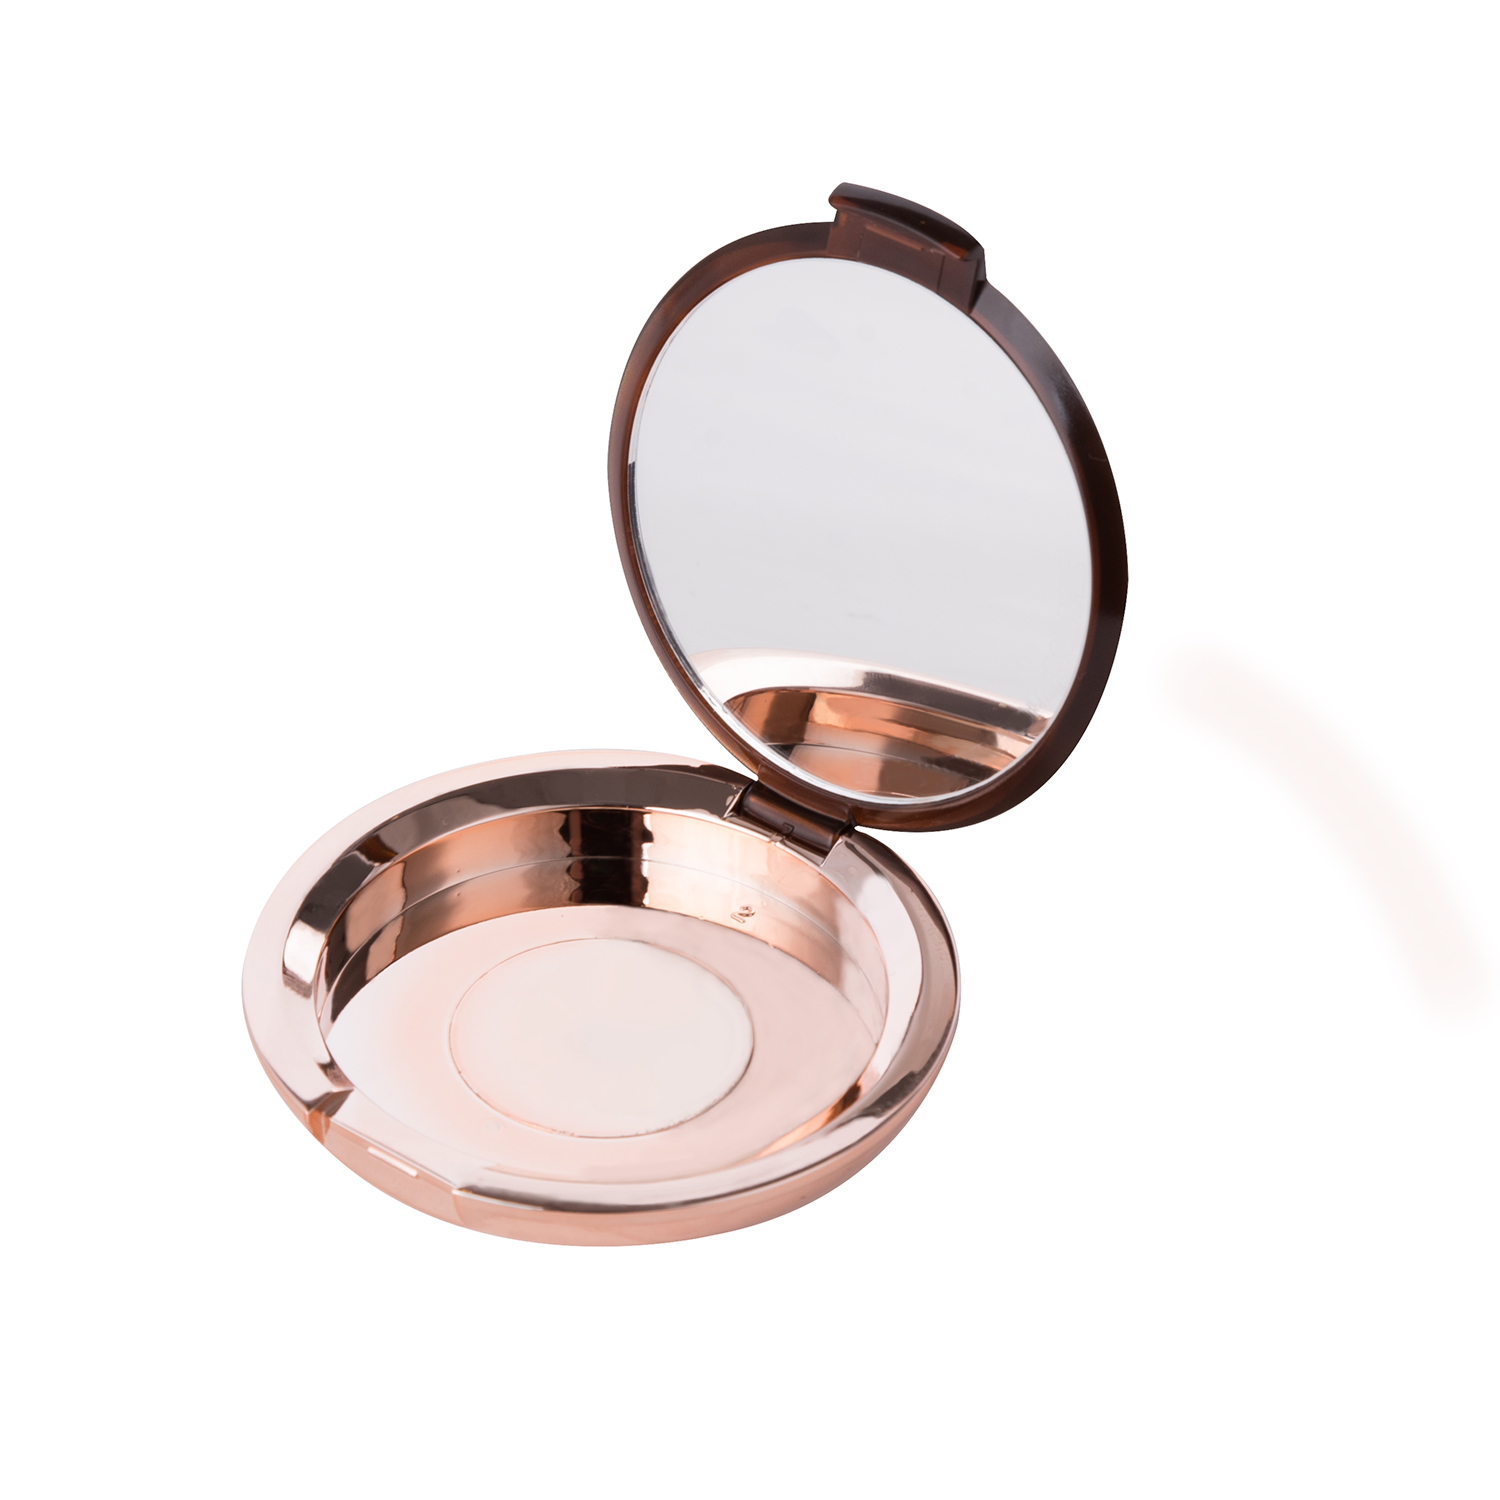 Black And Champagne Round Empty Makeup Compact Case with Mirror